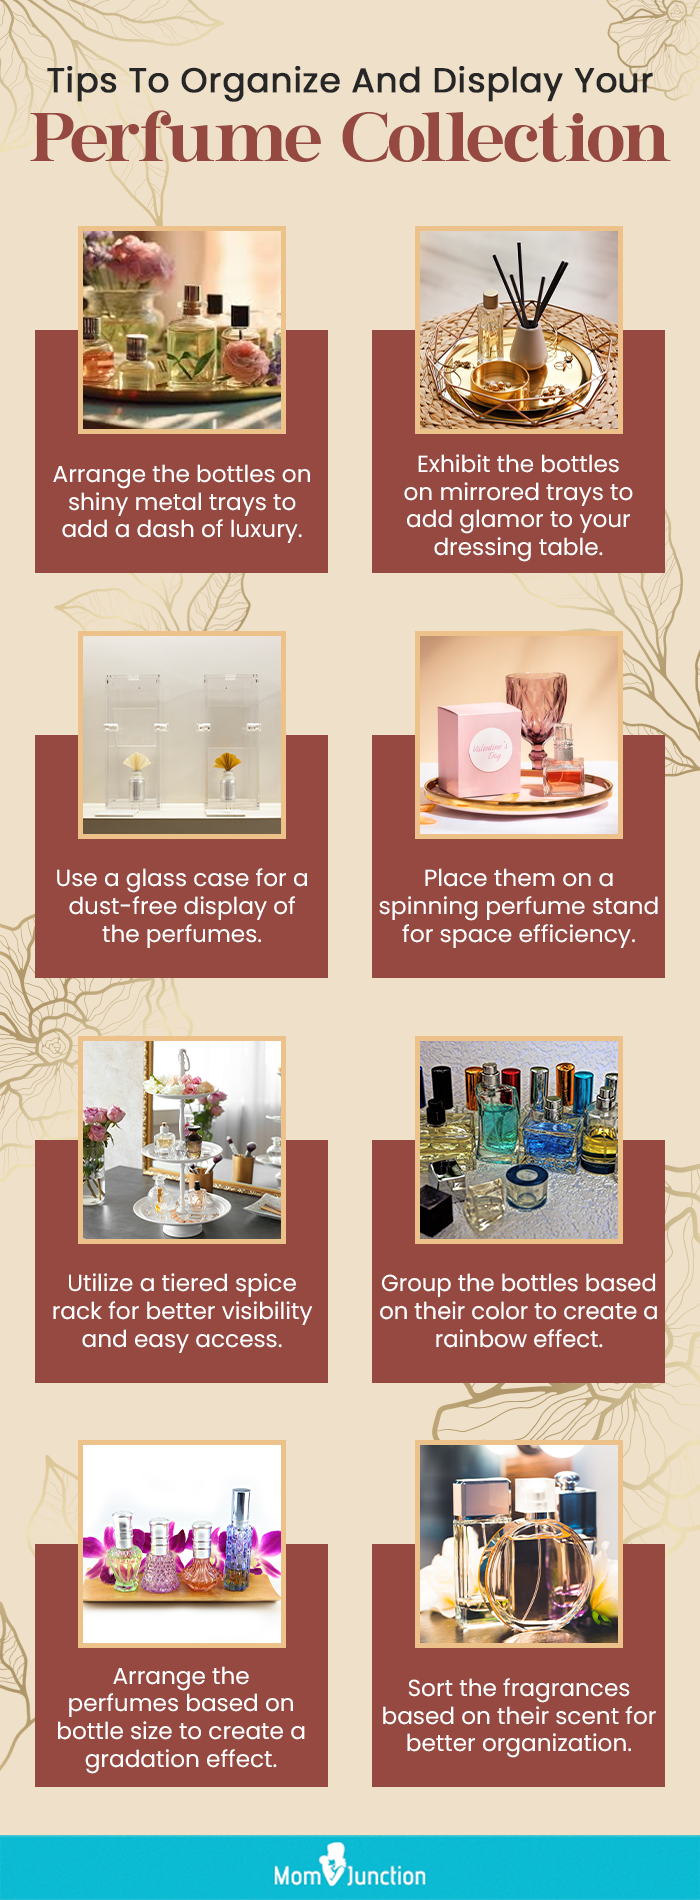 Tips To Organize And Display Your Perfume Collection (infographic)